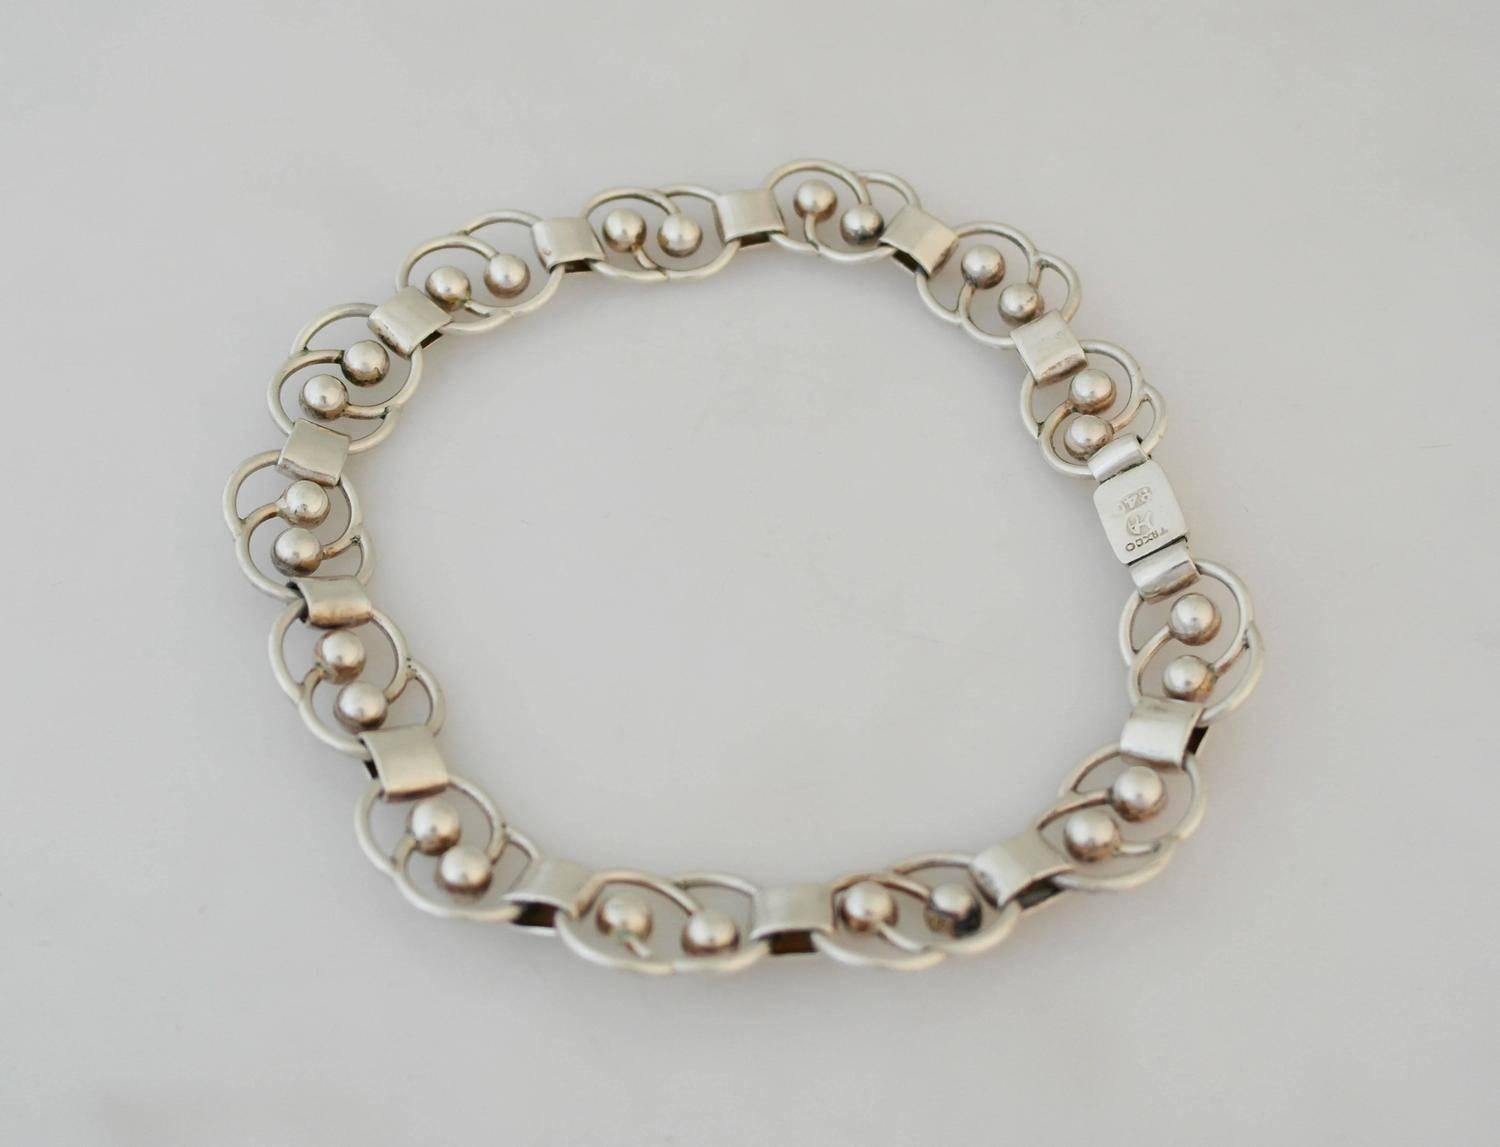 Early Hector Aguilar Sterling Silver Necklace 1955 Circular Link Motif For Sale 2